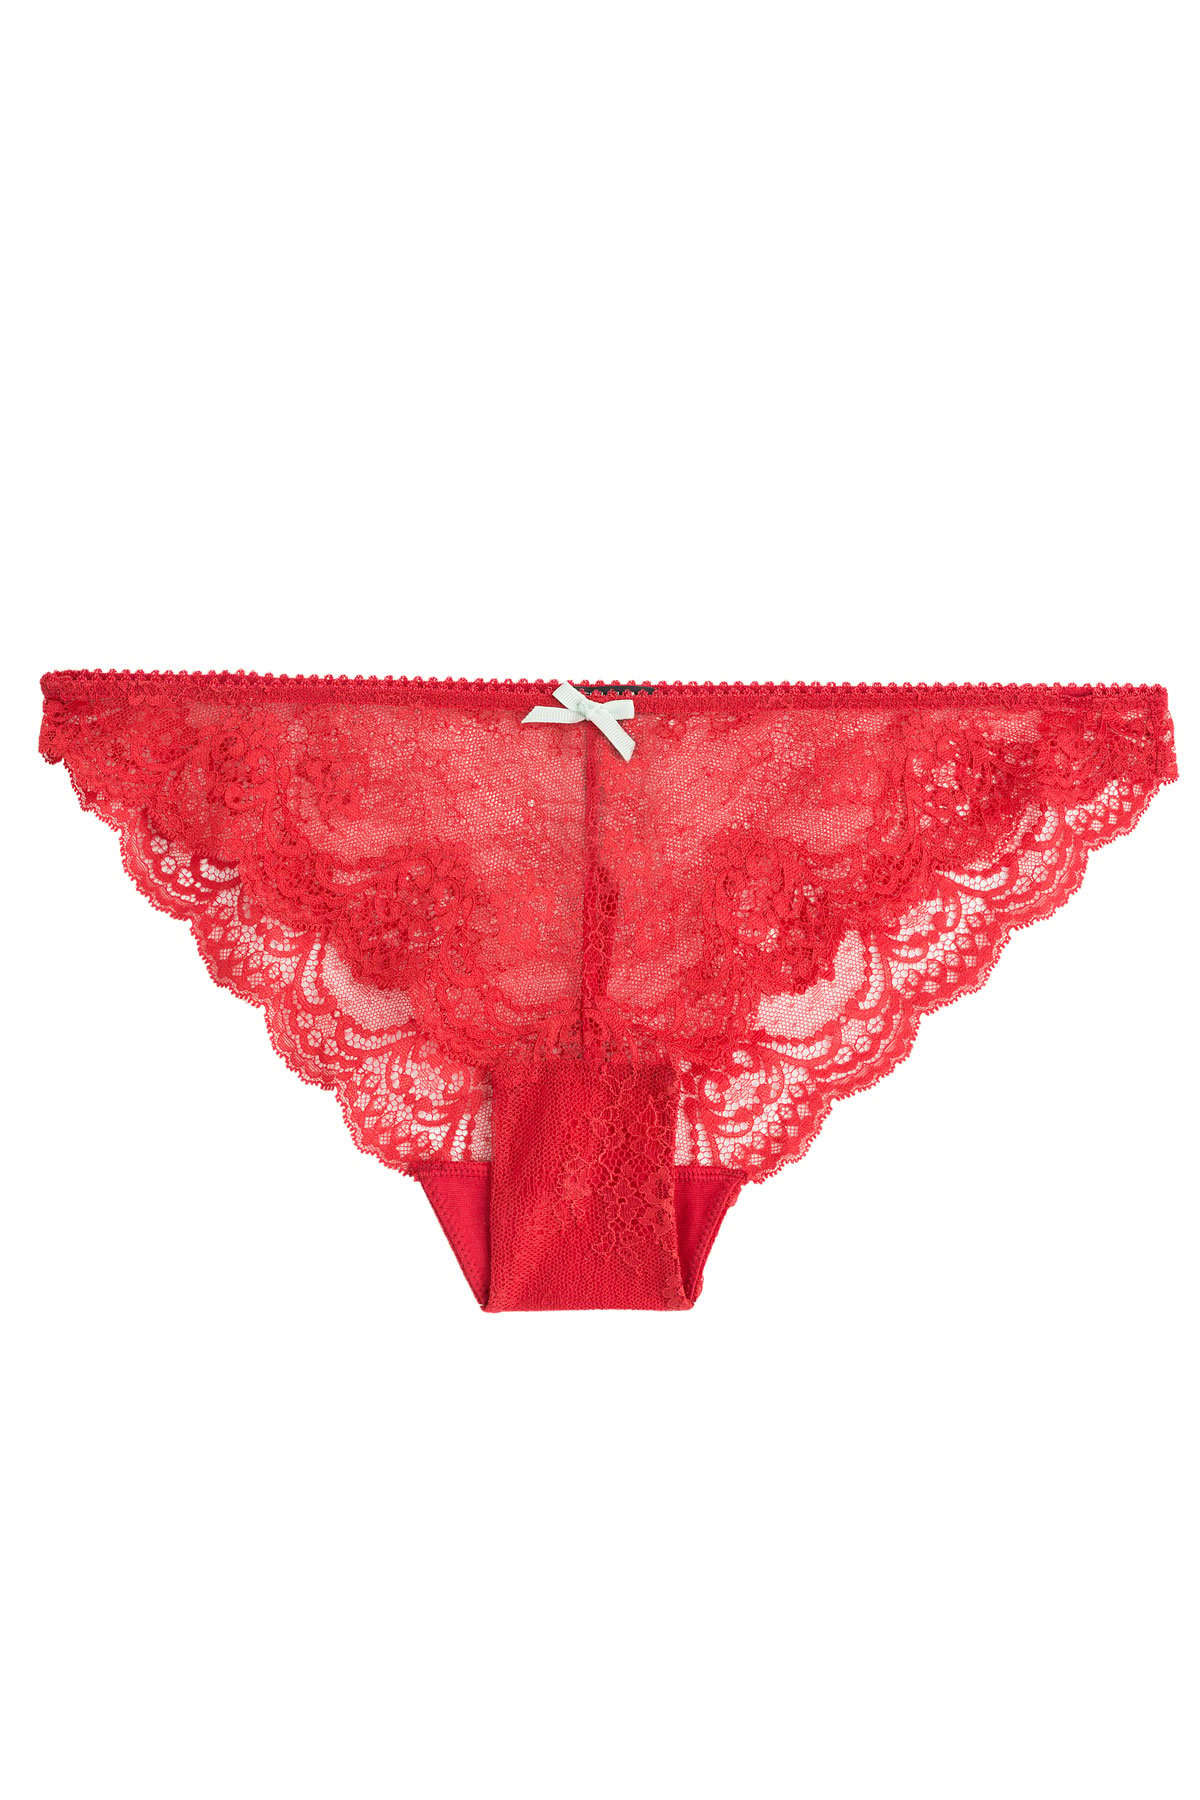 Heidi Klum Intimates Commited Love Lace Briefs - Red in Red | Lyst